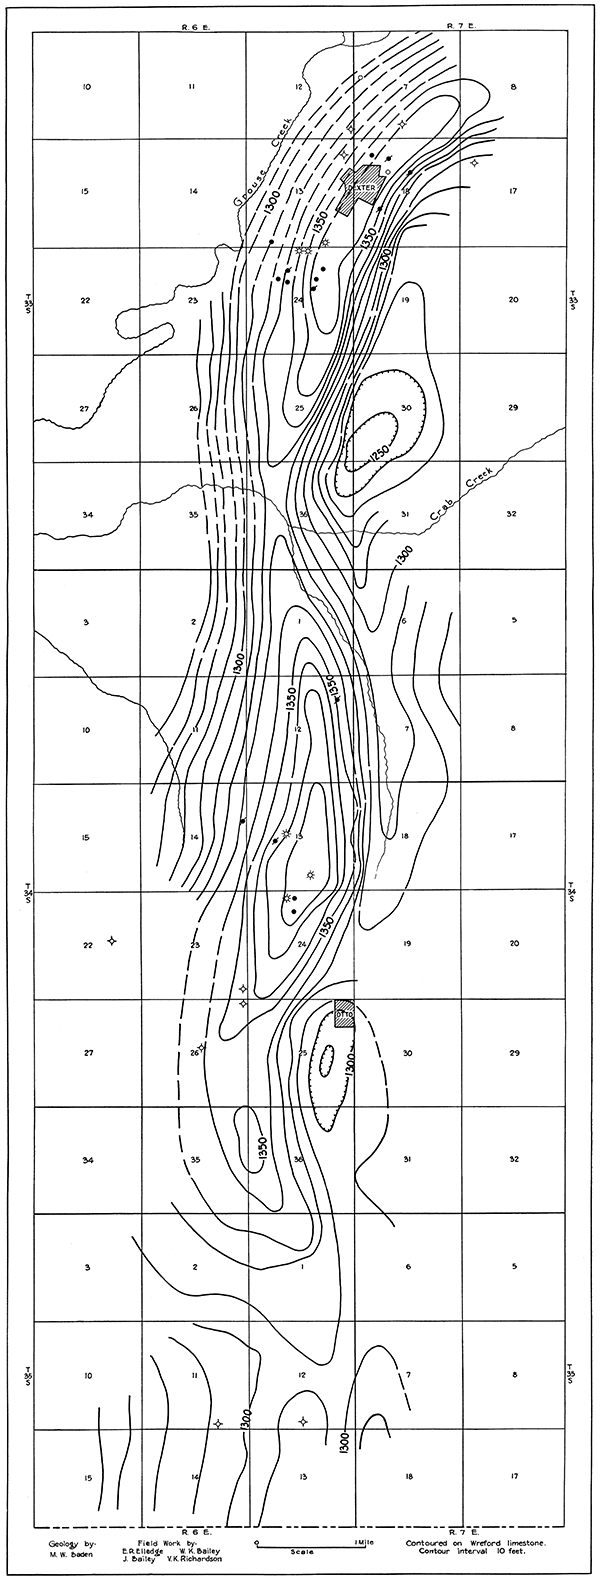 Map of the Dexter anticline.